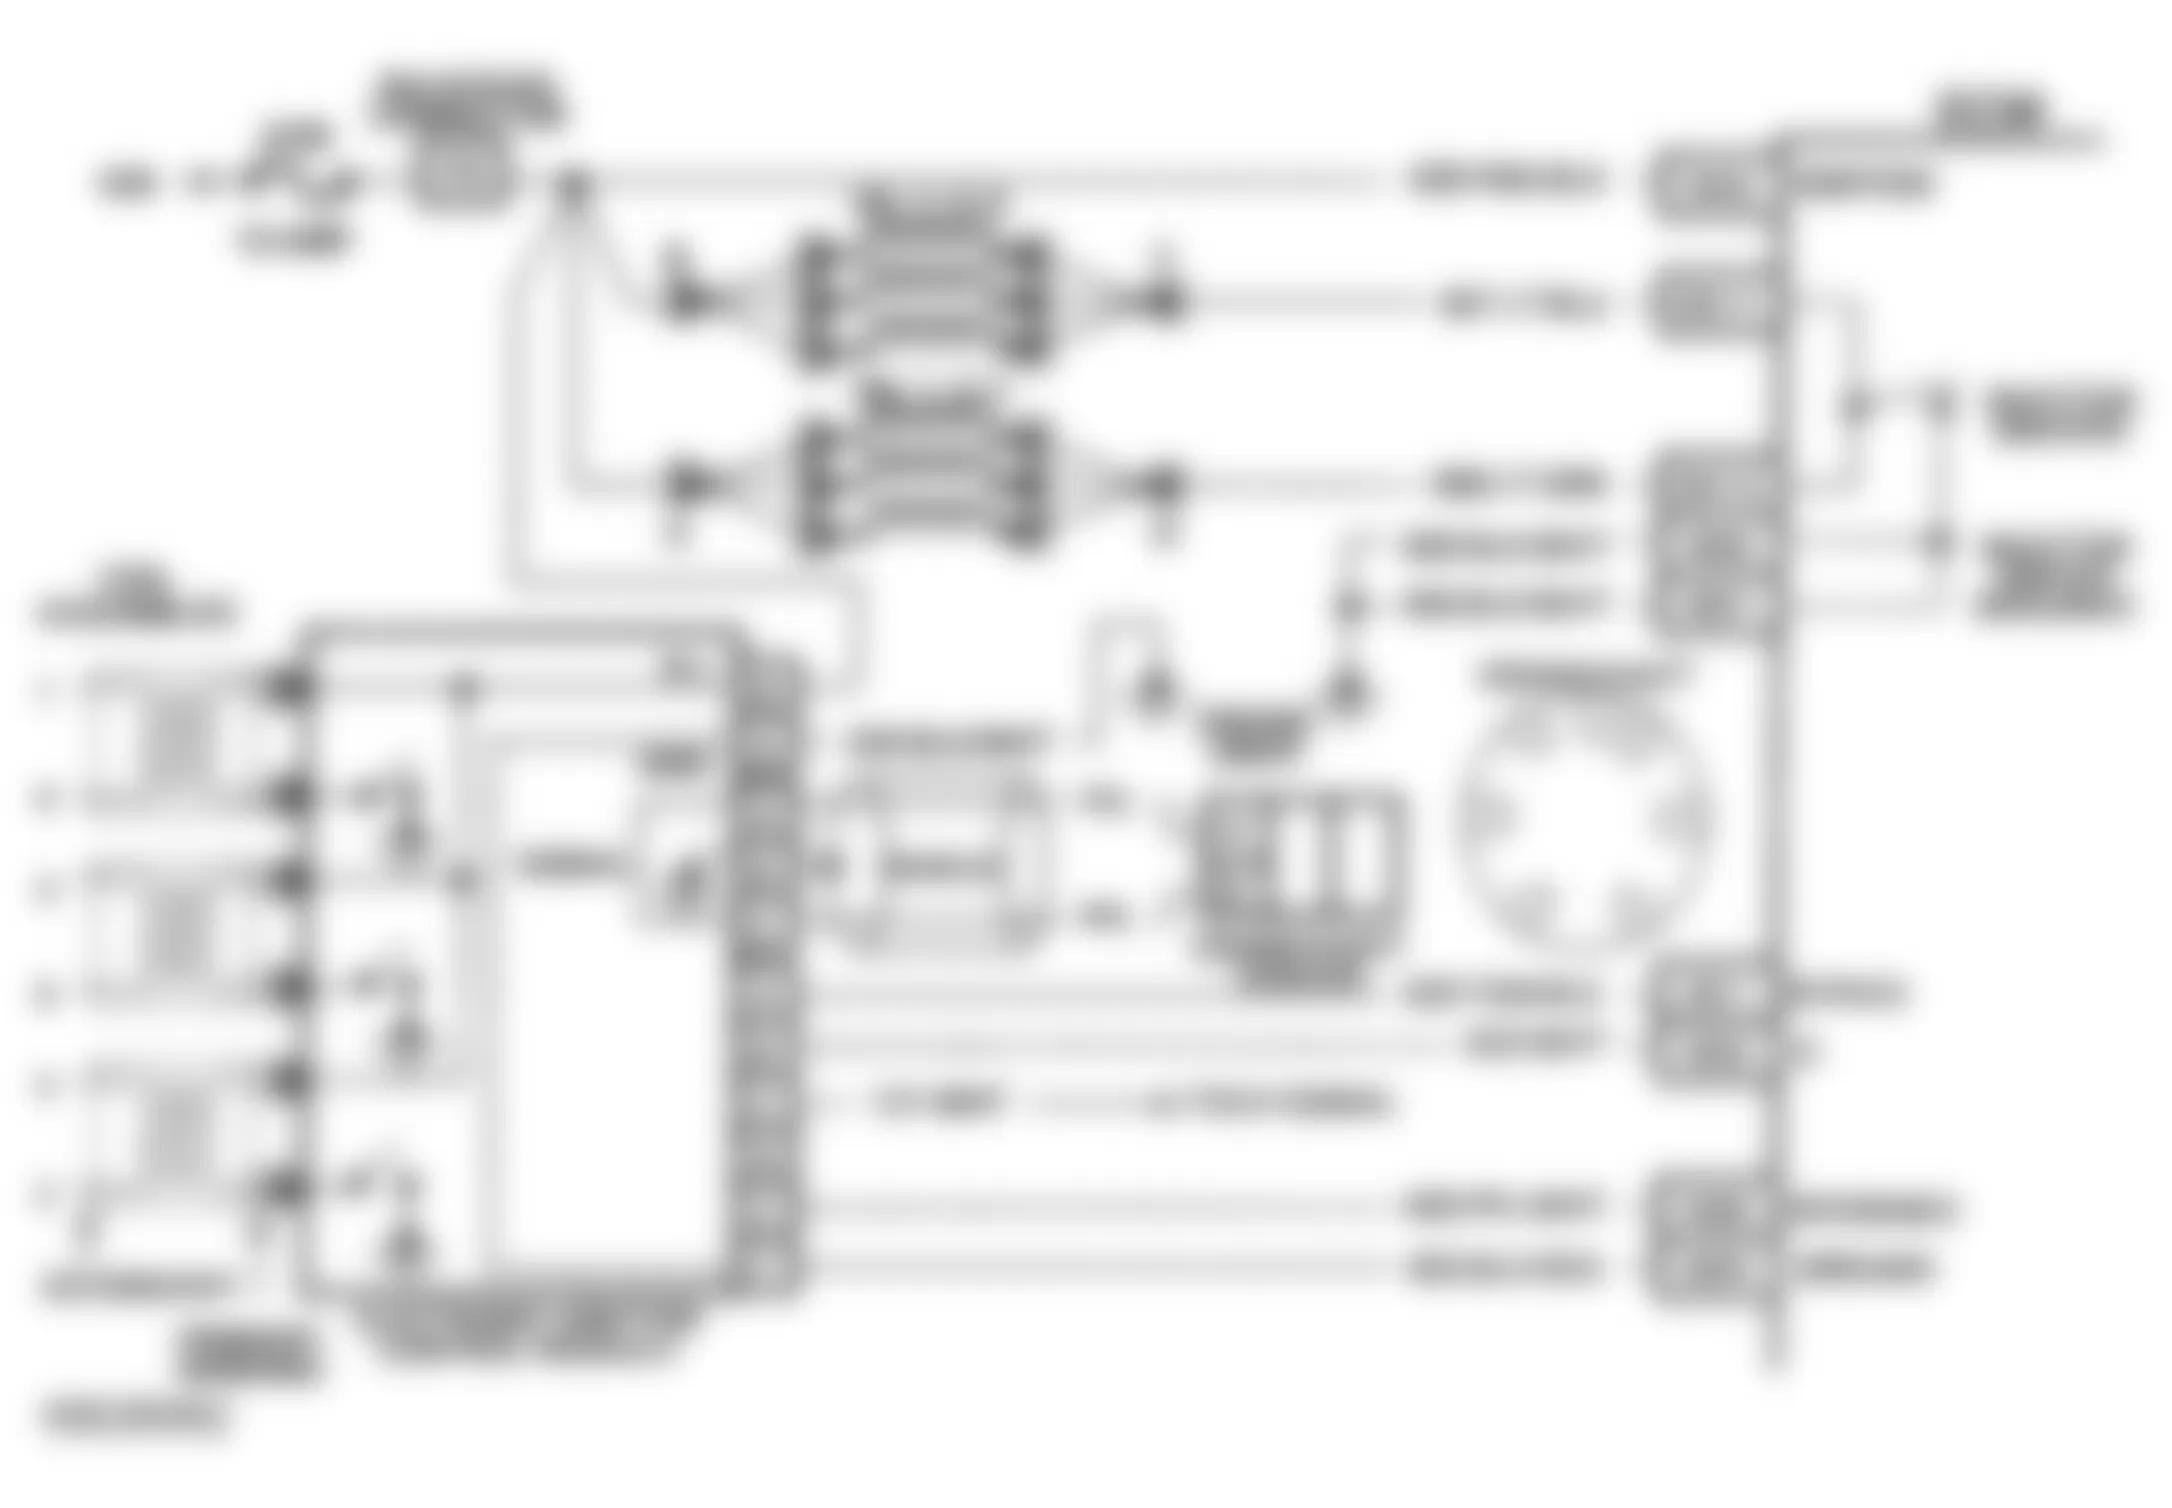 Buick Regal Custom 1993 - Component Locations -  Code 42 Schematic (3.1L J Body) EST Circuit Open Or Grounded